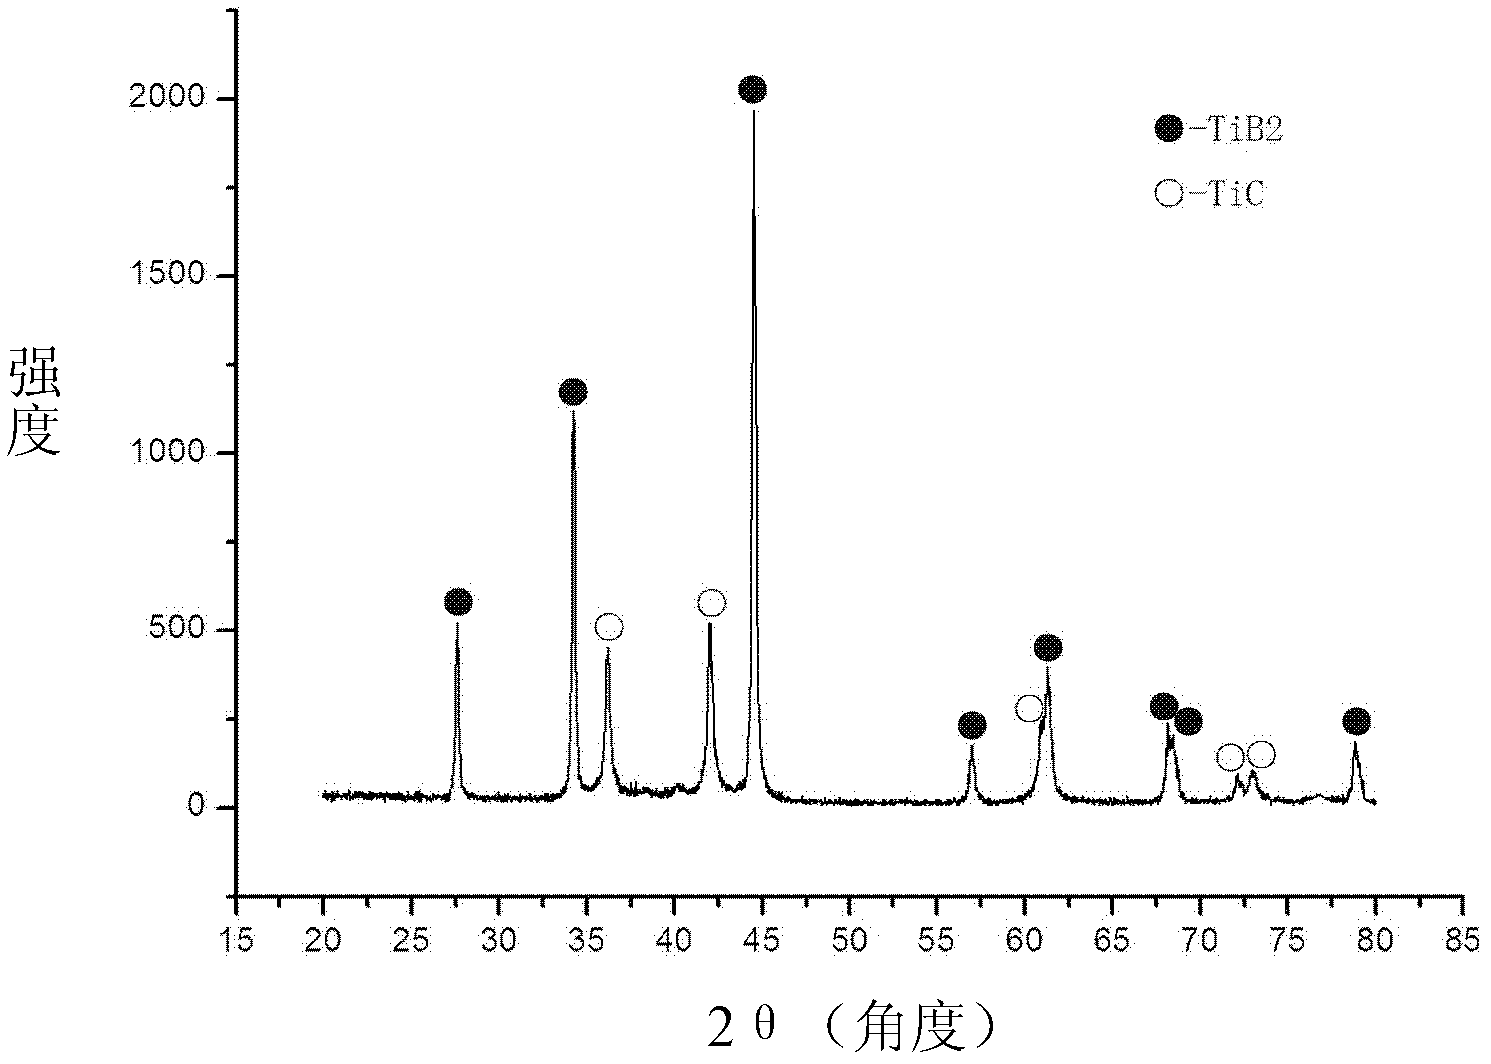 Method for preparing TiB2/TiC (titanium diboride/titanium carbide) ultrafine powder for surface spraying of engine piston ring by means of high energy ball milling